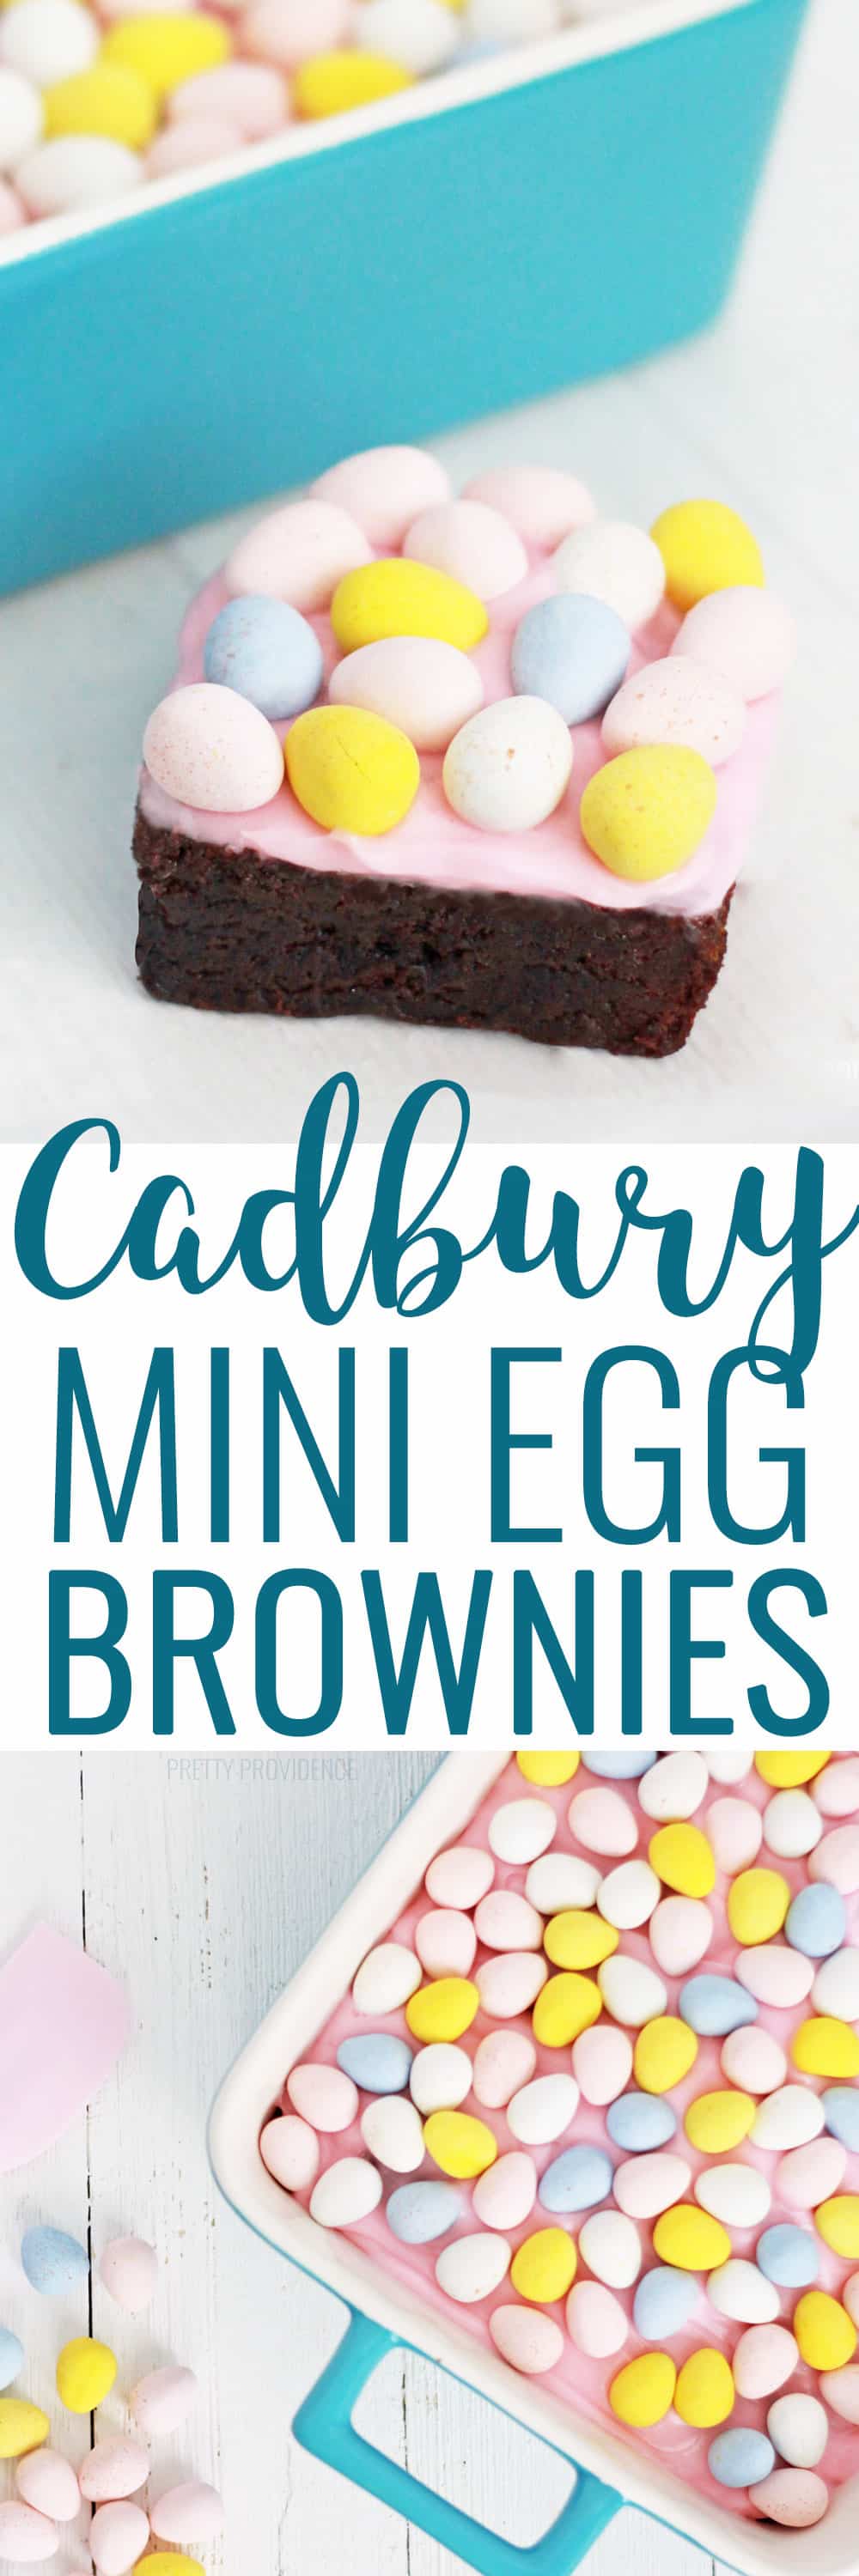 Brownies. Cream cheese frosting. Cadbury mini eggs. Say no more!!! These Easter brownies are amazing!!! 